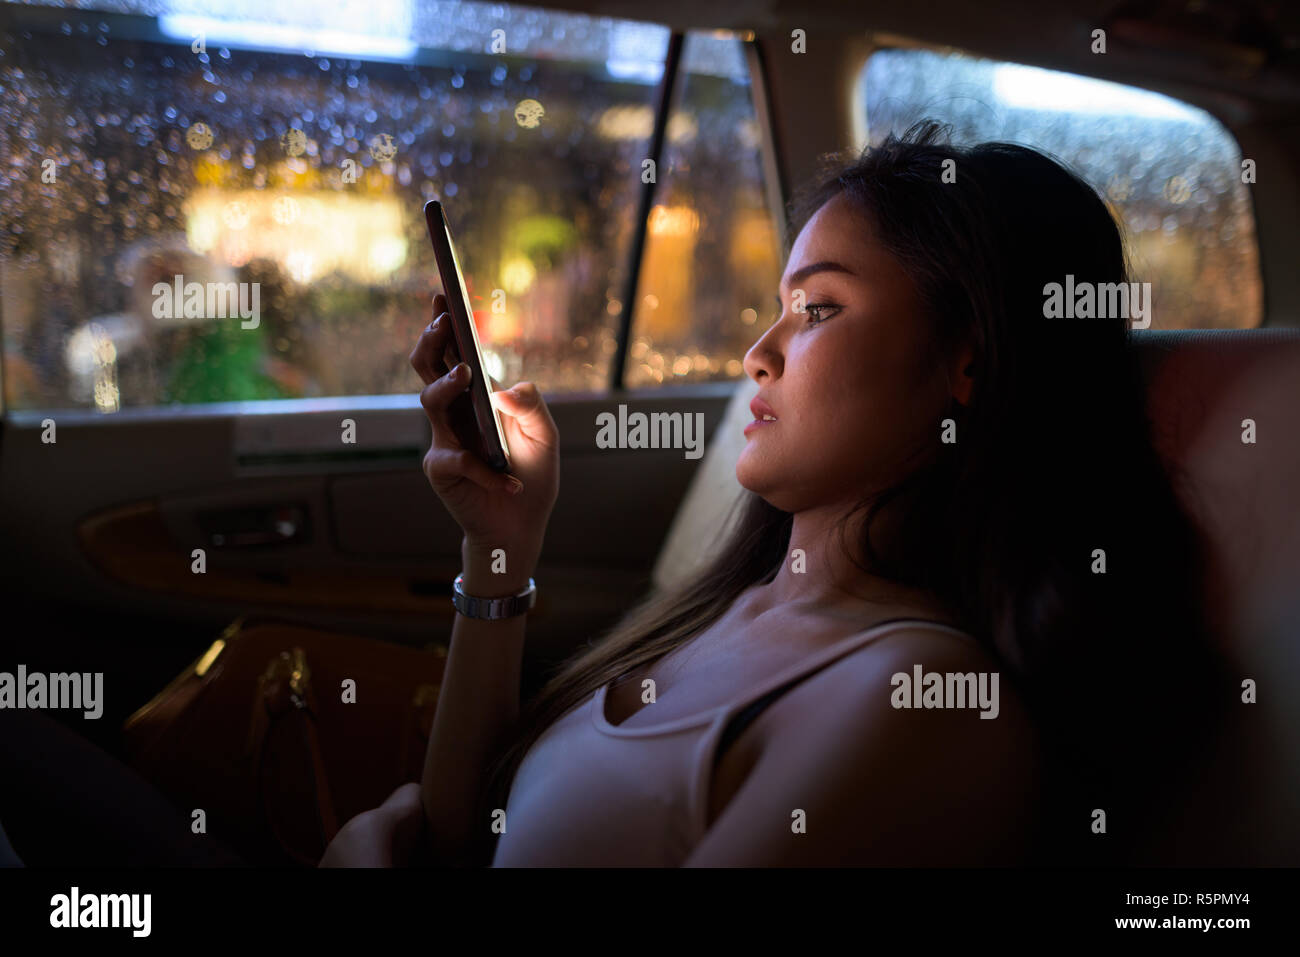 Young beautiful woman sitting in taxi car while using mobile phone at night Stock Photo